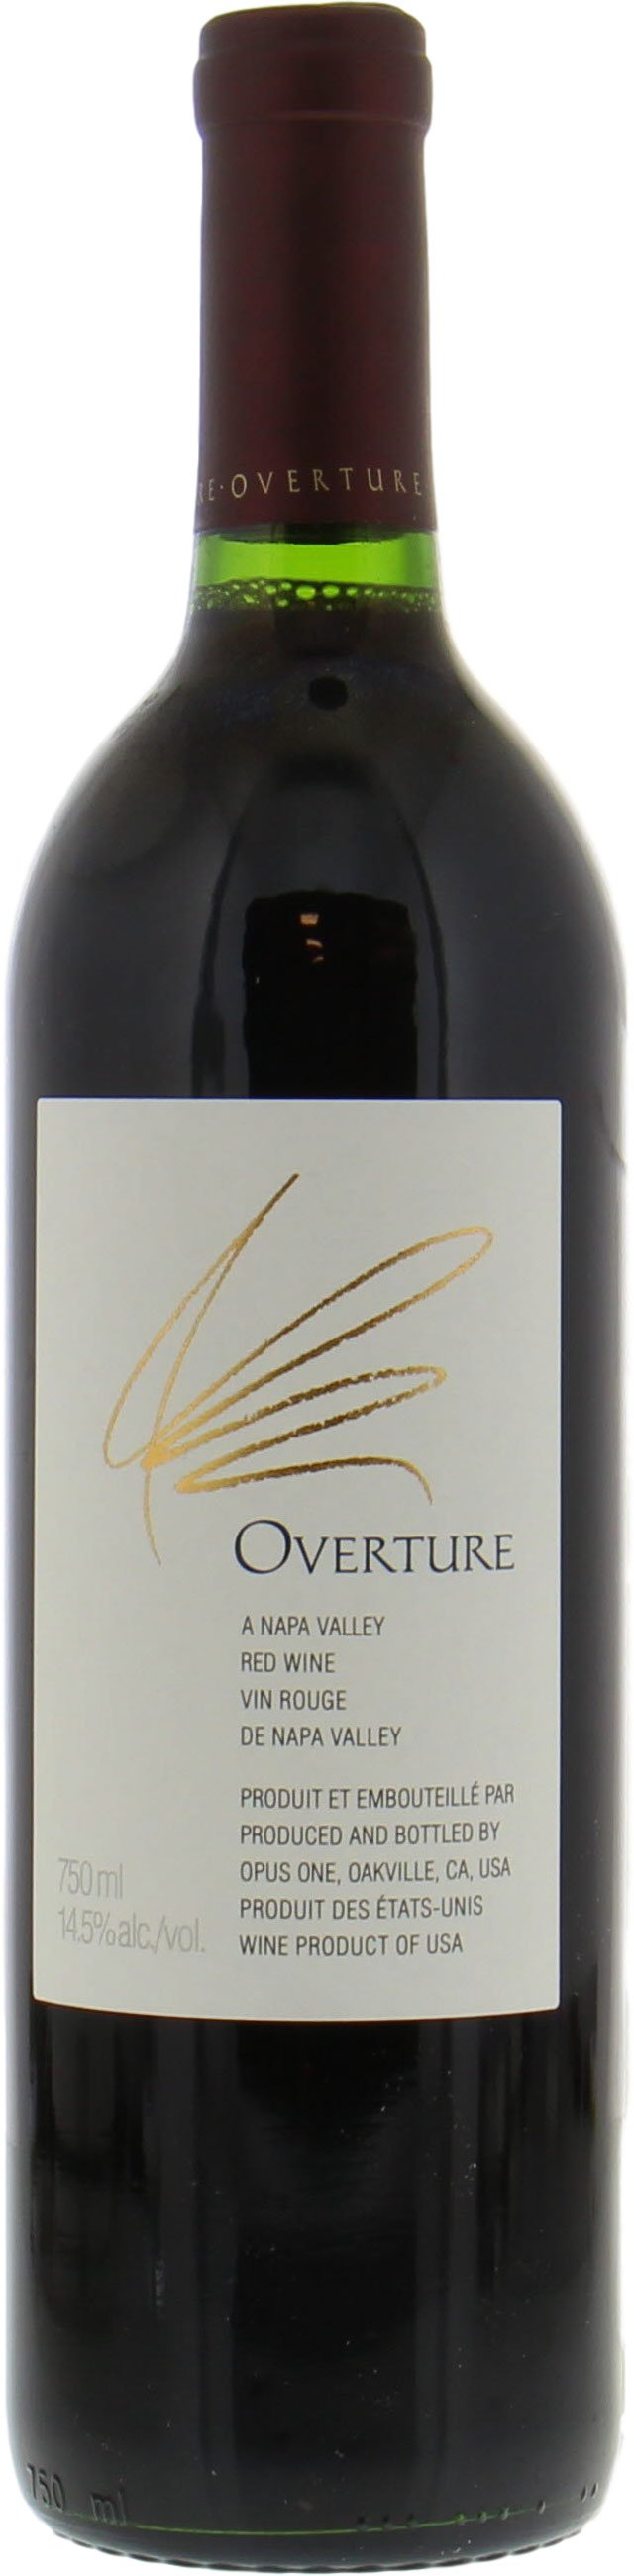 Opus One - Overture release 2018 2018